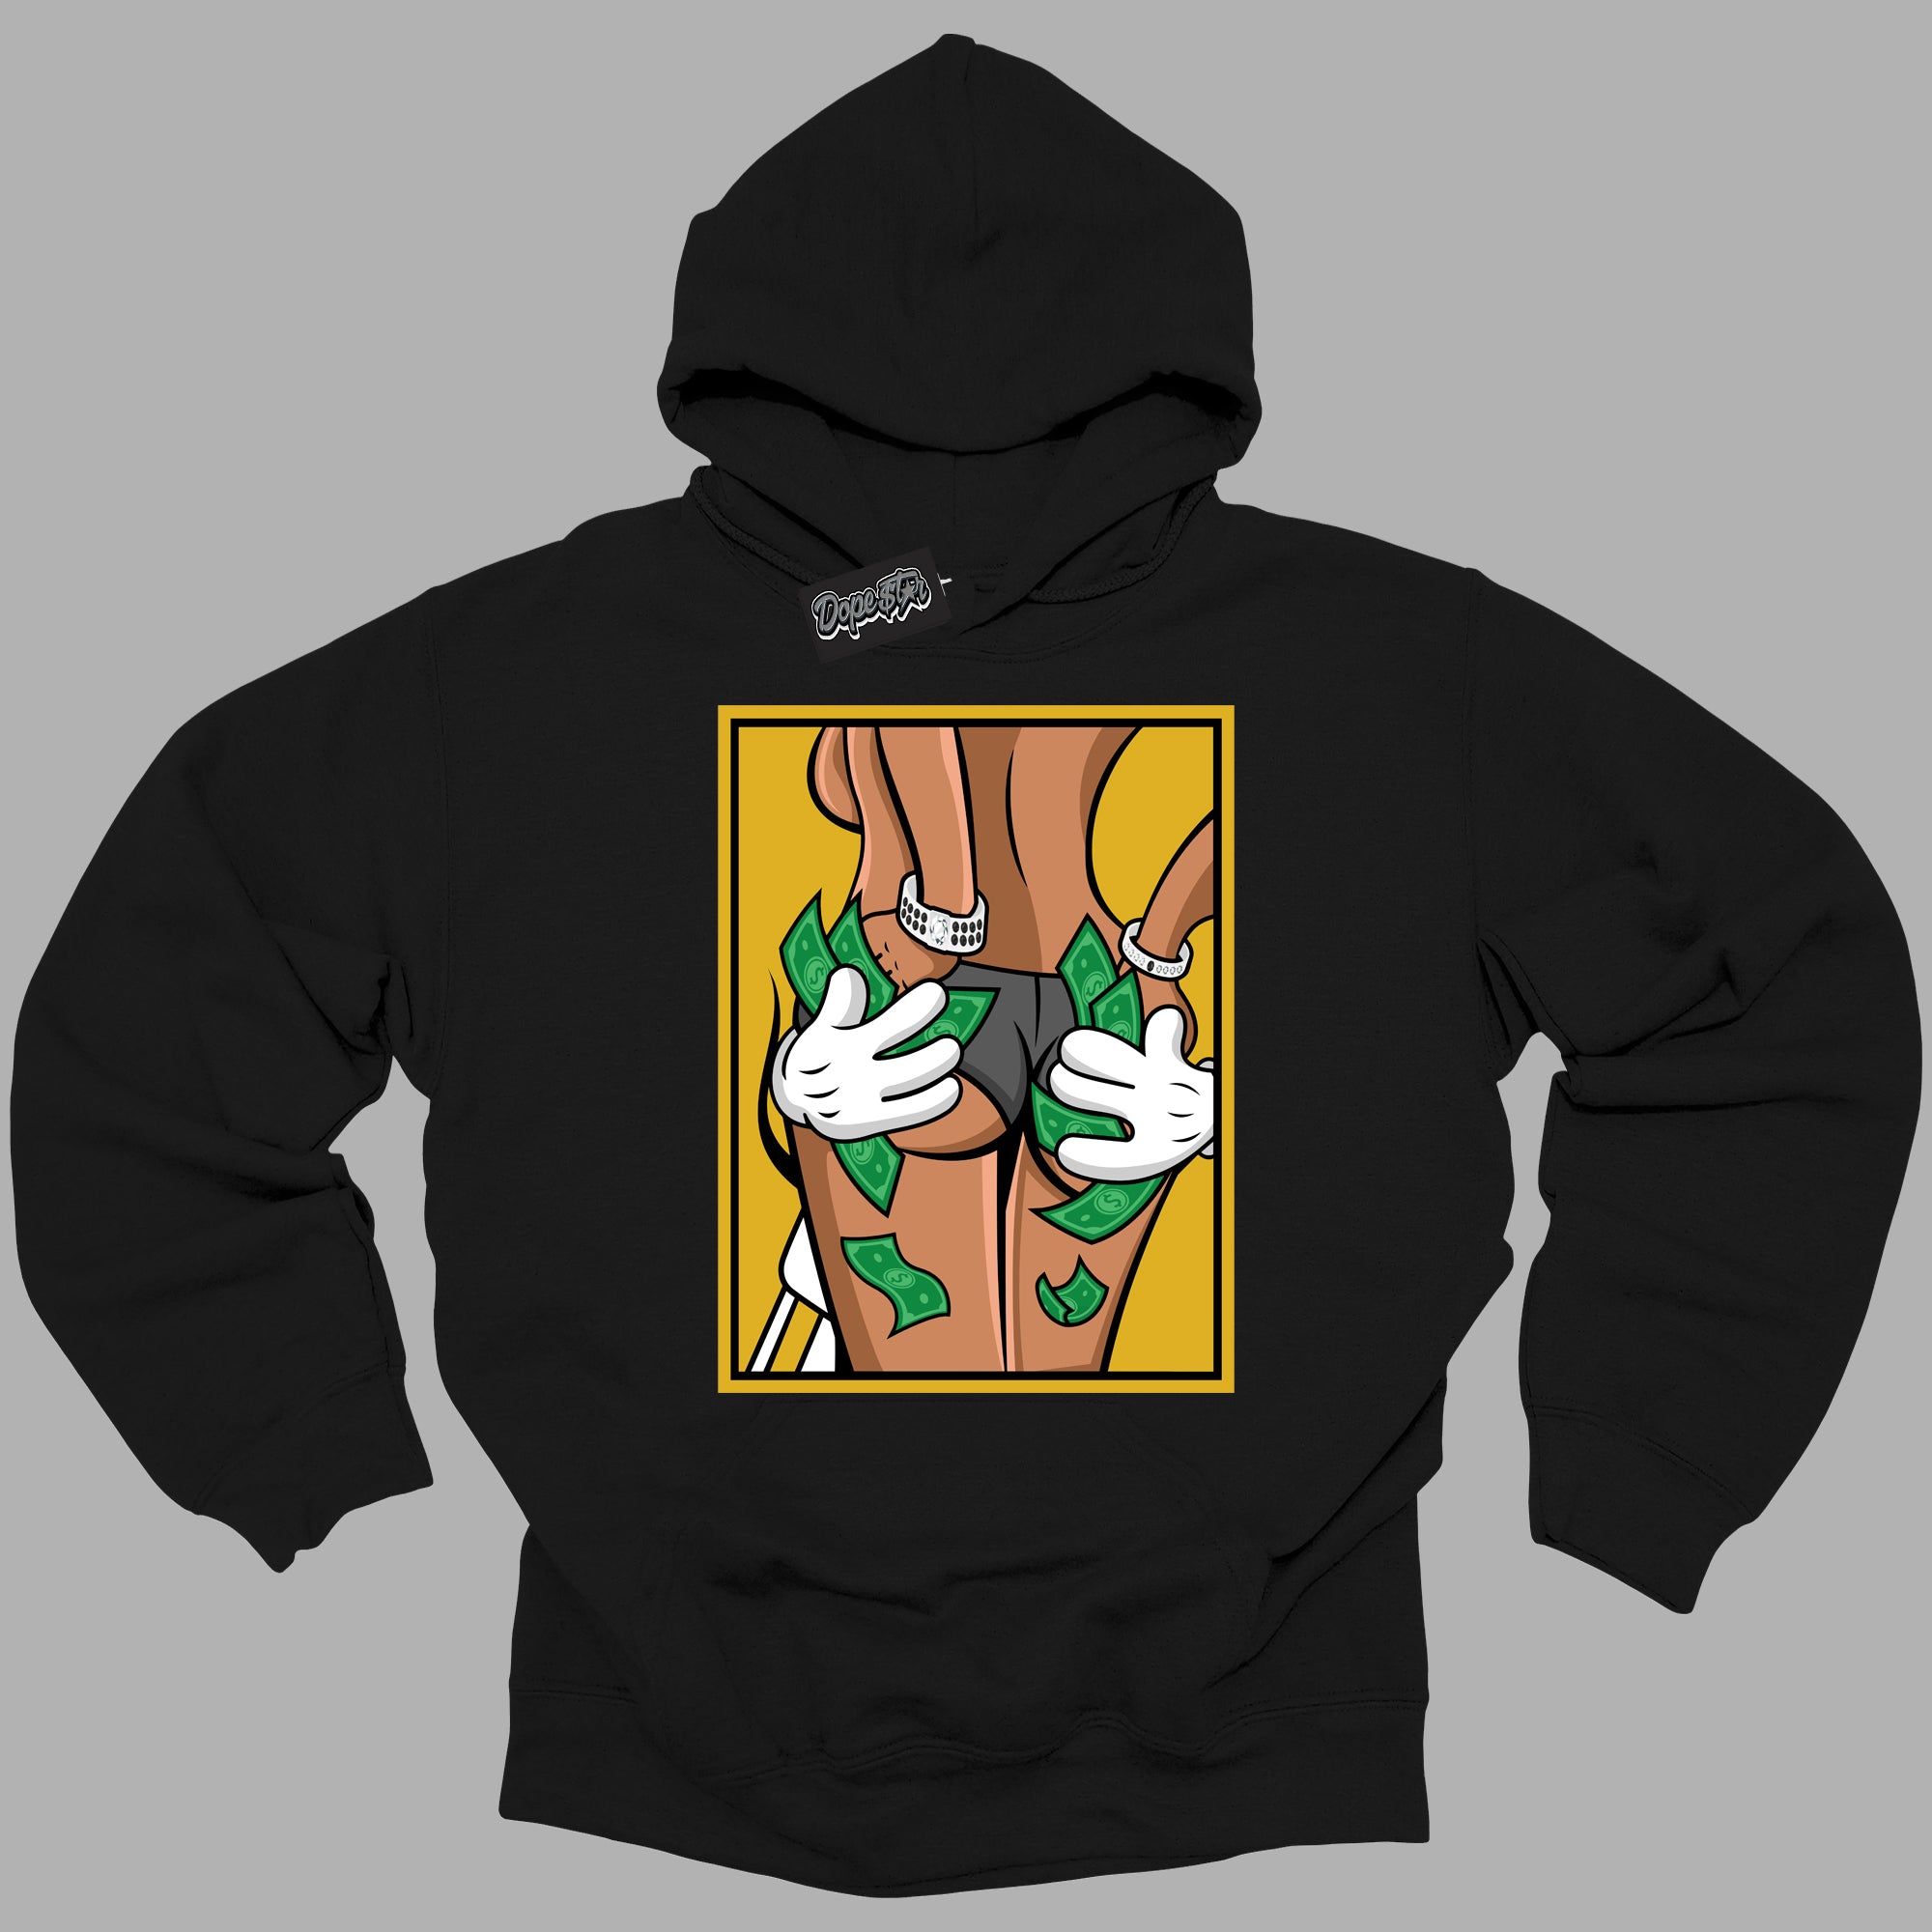 Cool Black Hoodie with “ Money Hands ”  design that Perfectly Matches Yellow Ochre 6s Sneakers.